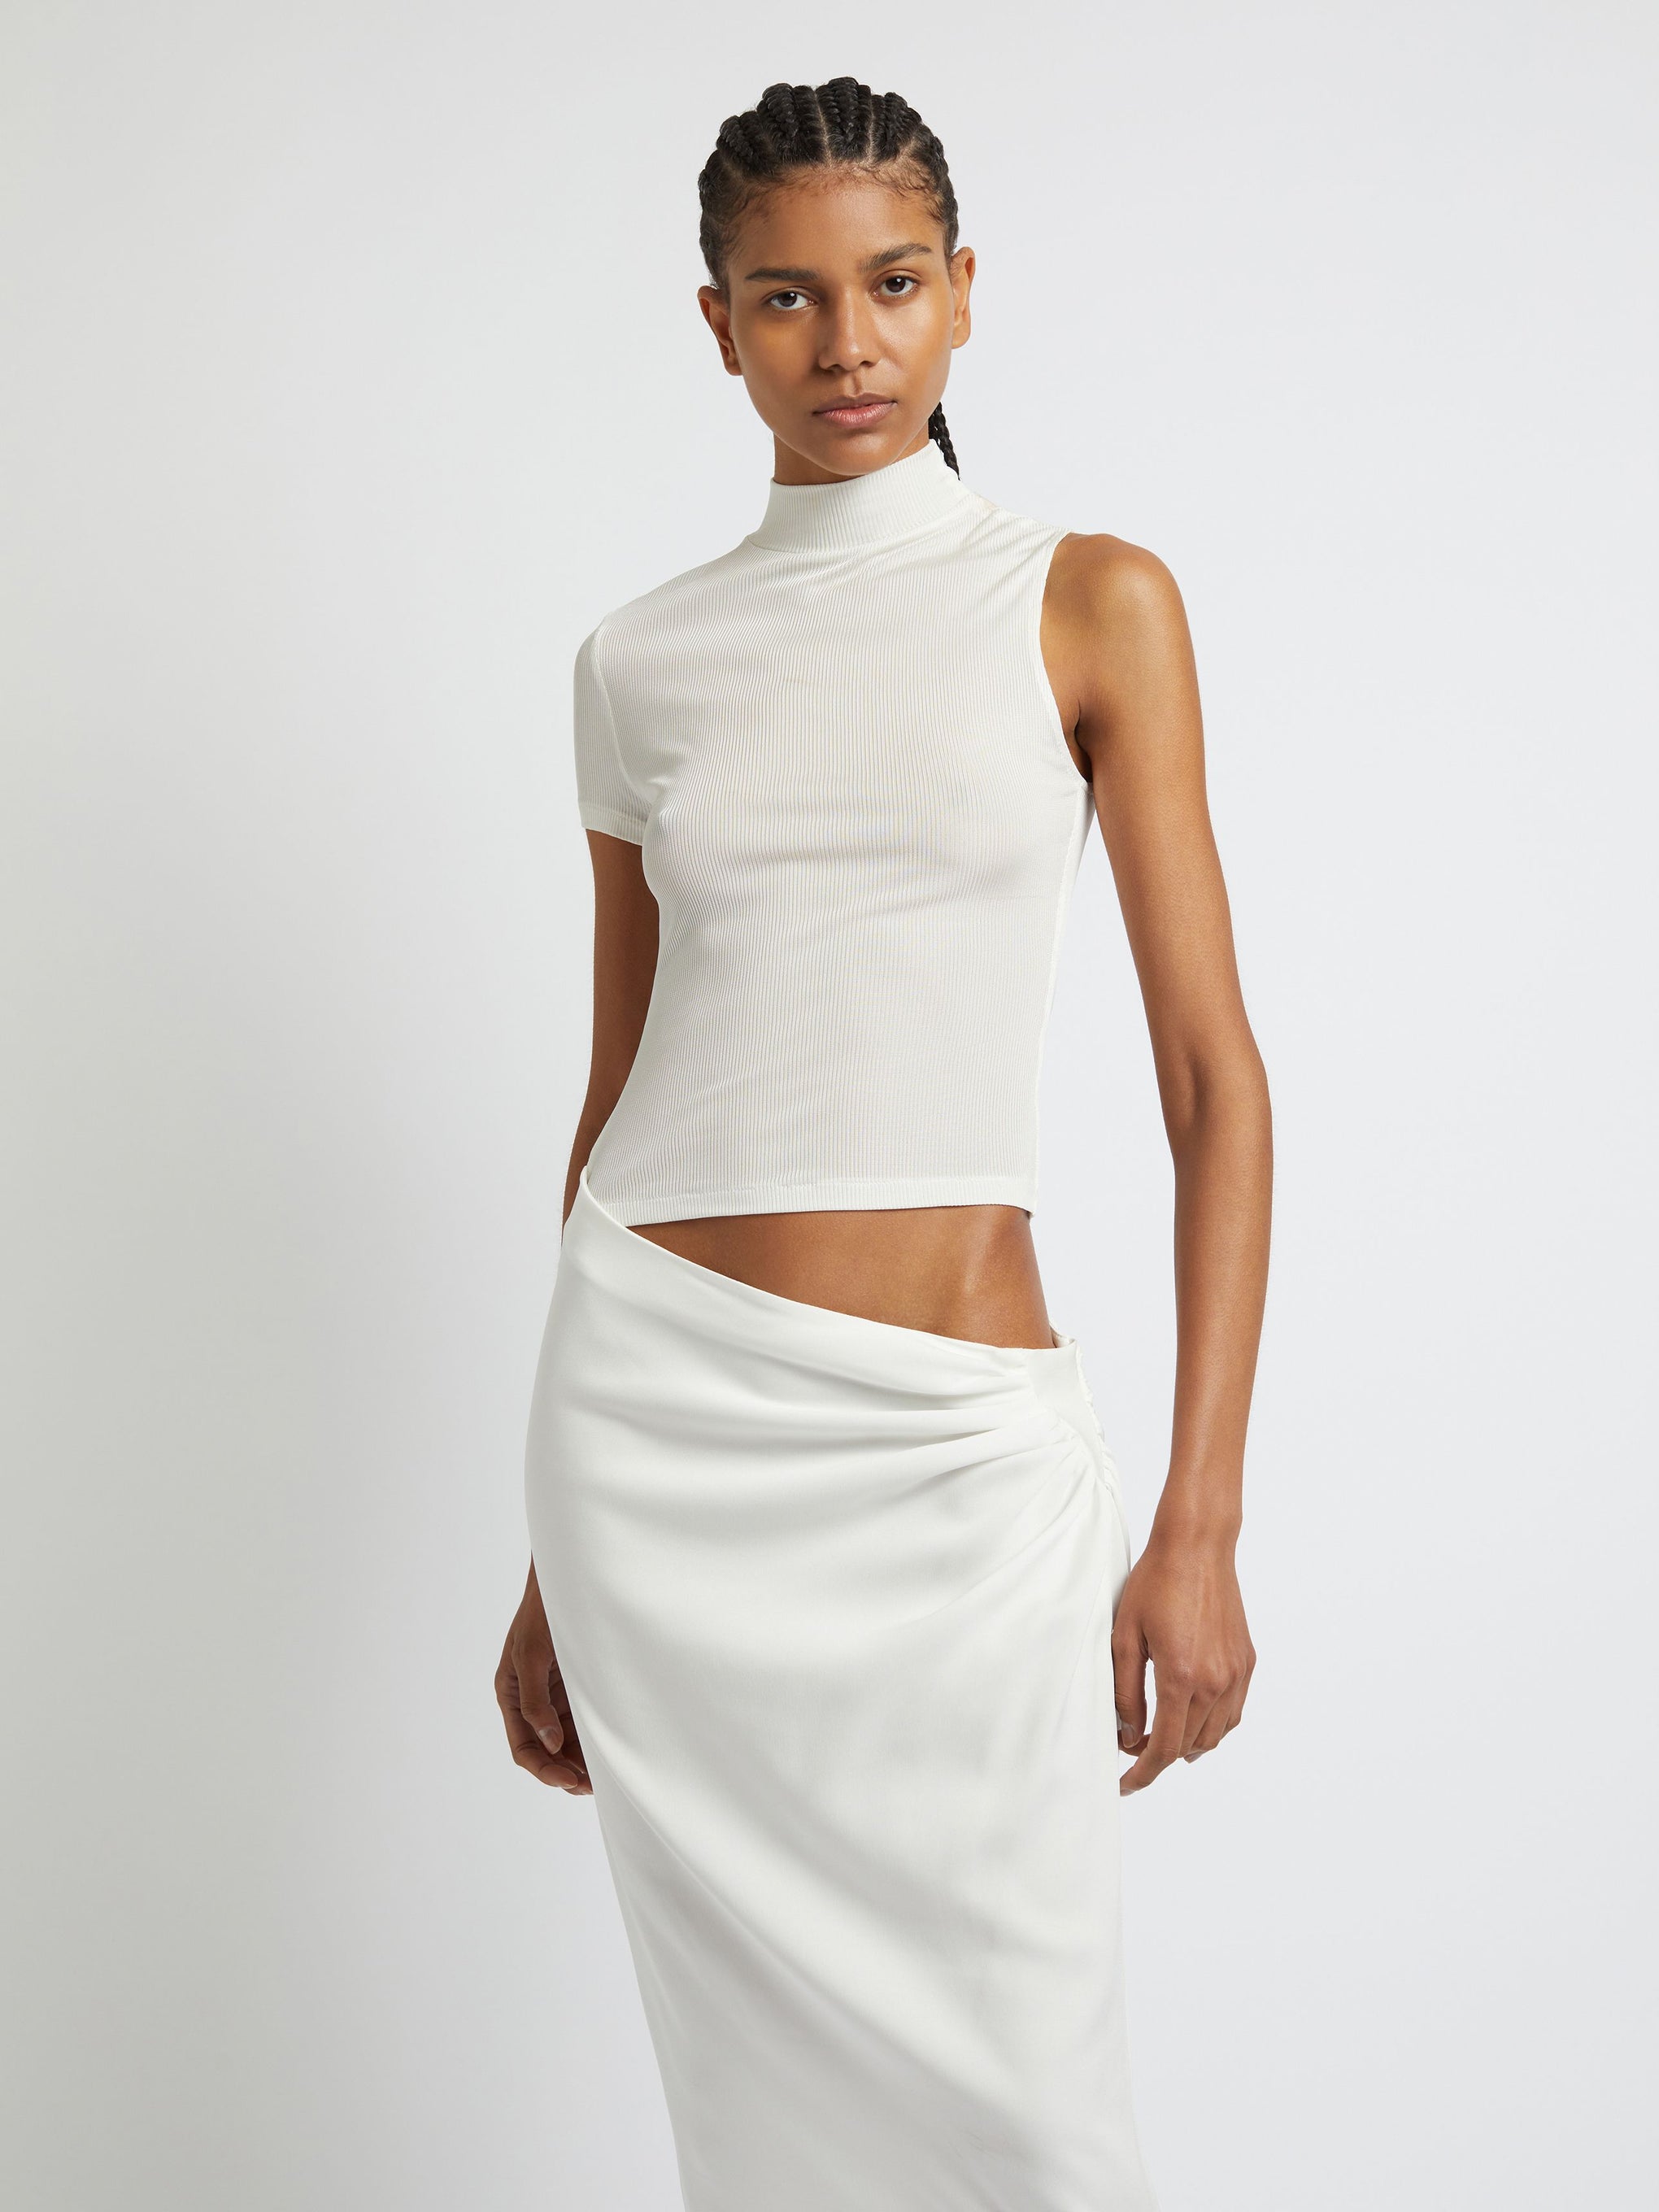 The Christopher Esber Fusion Tee Dress in White available at The New Trend Australia